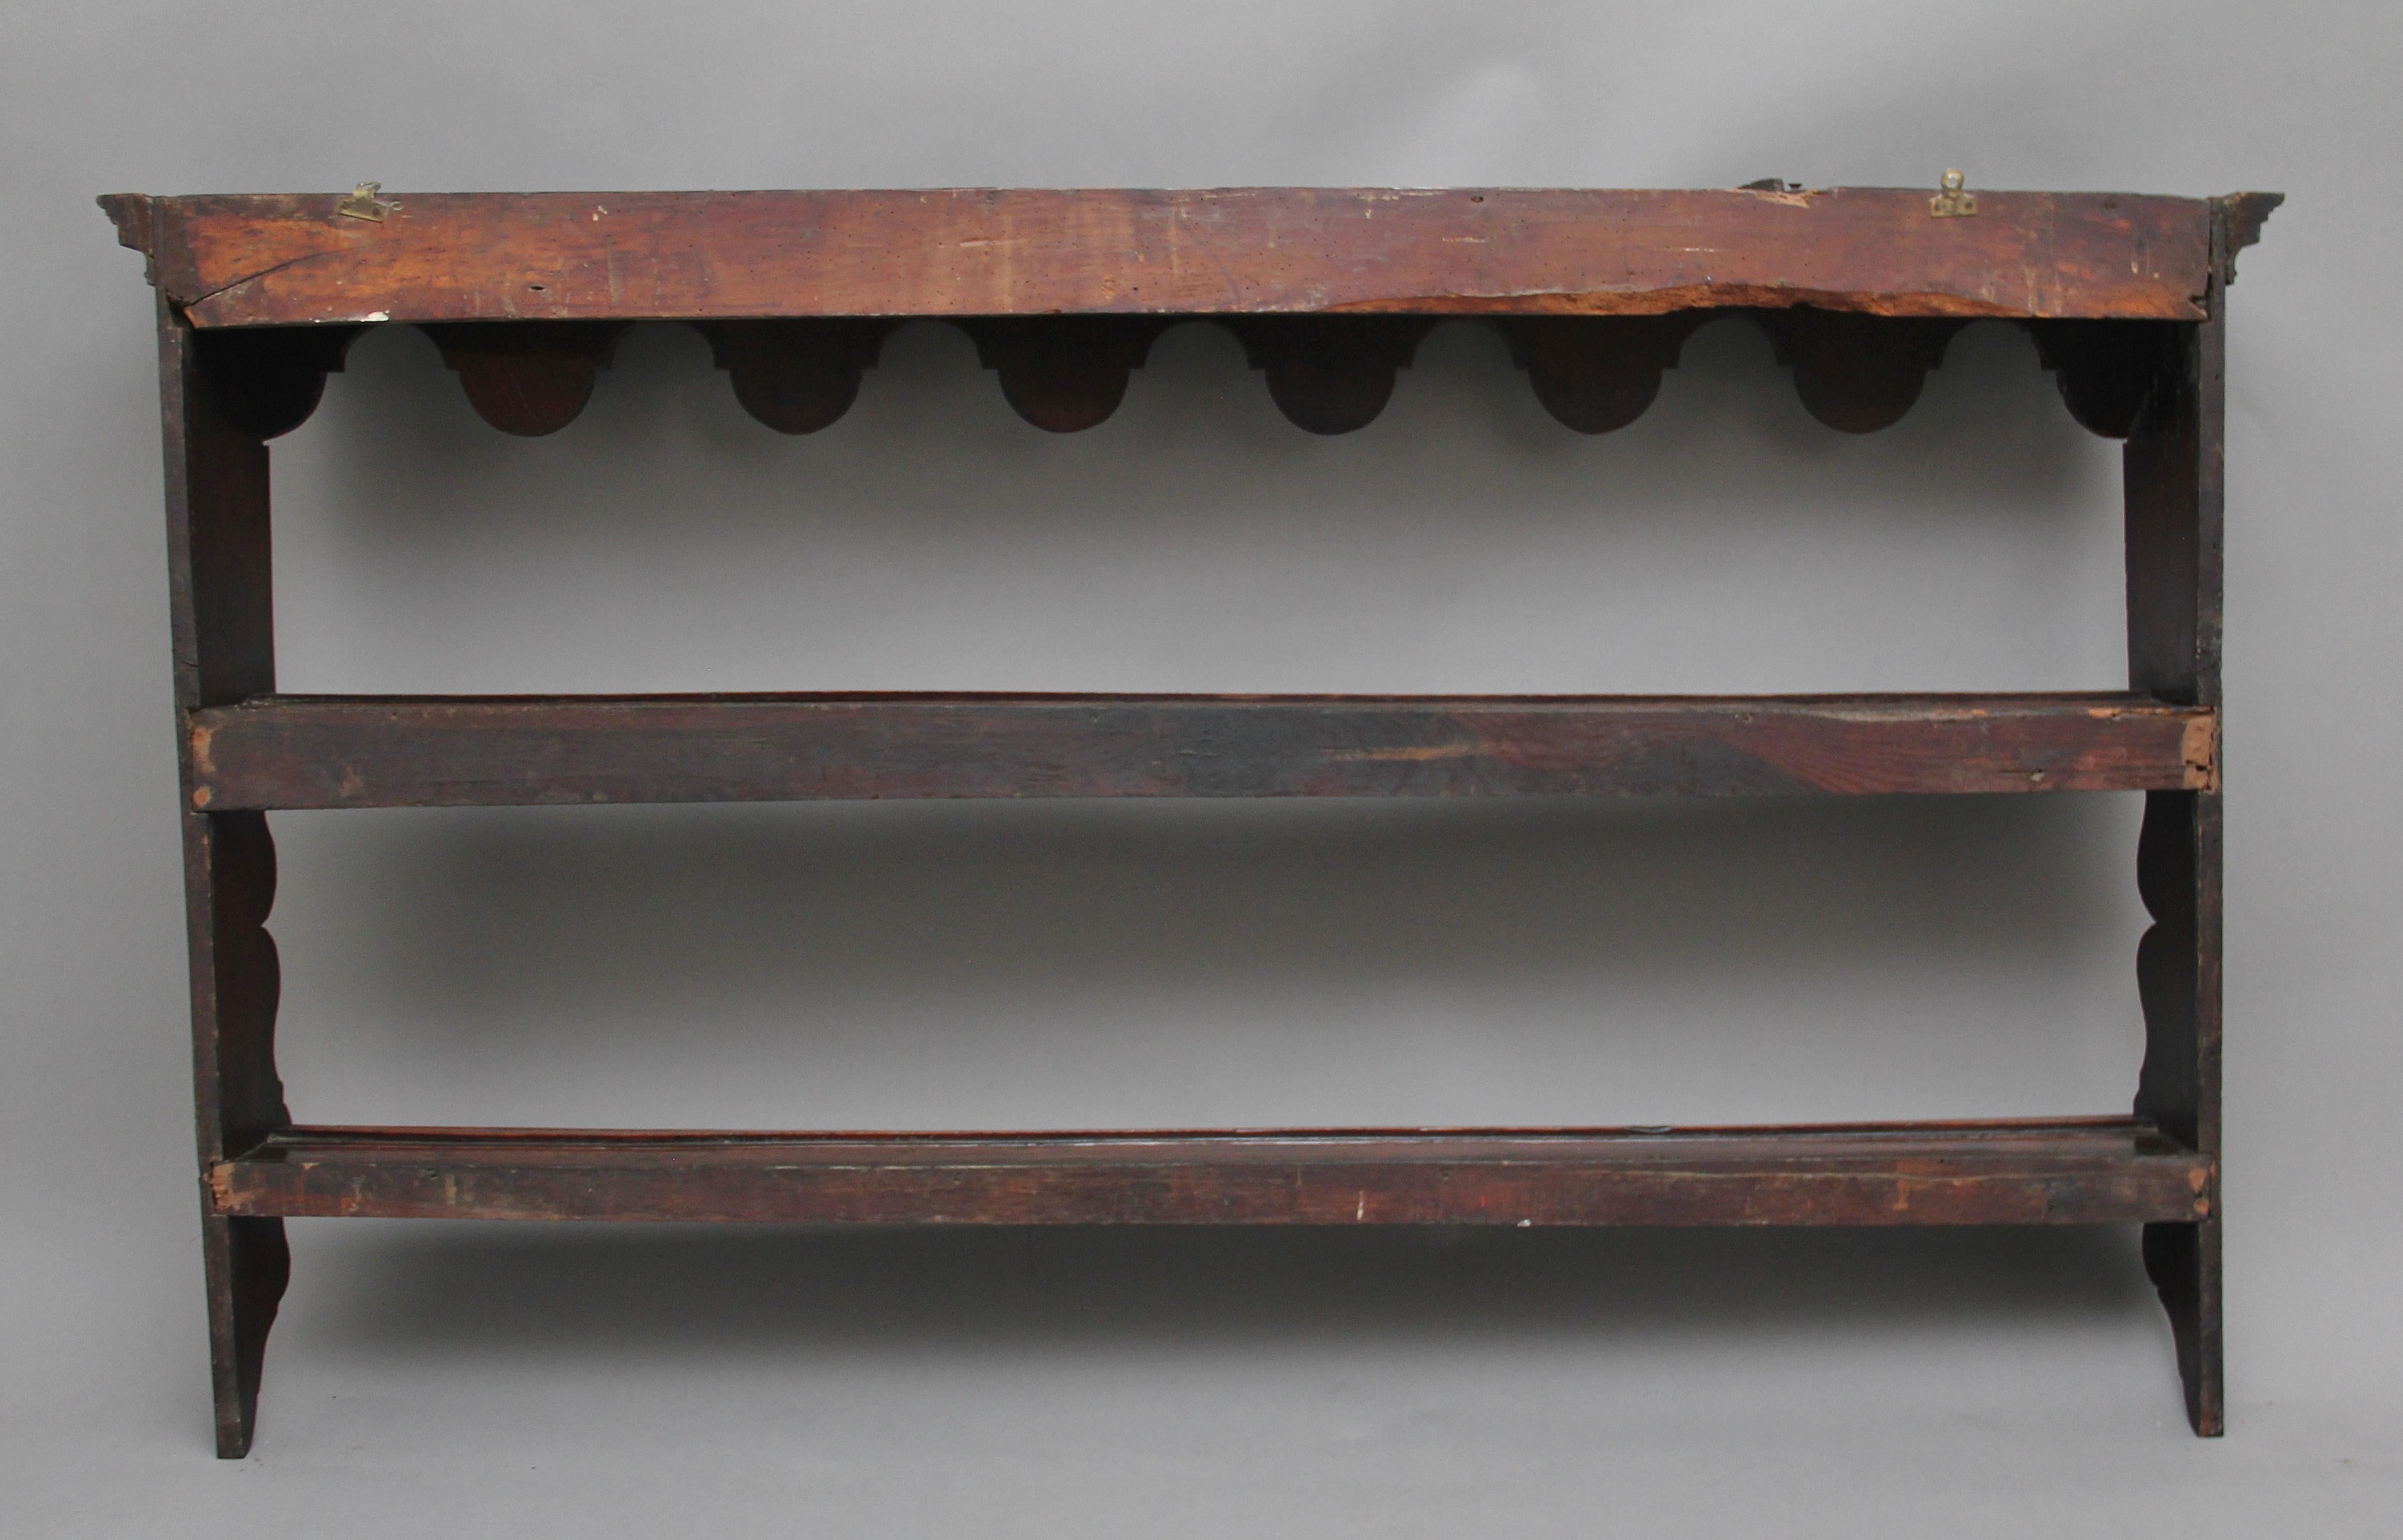 18th century oak hanging plate rack with two shelves and a shaped top and sides, circa 1780.